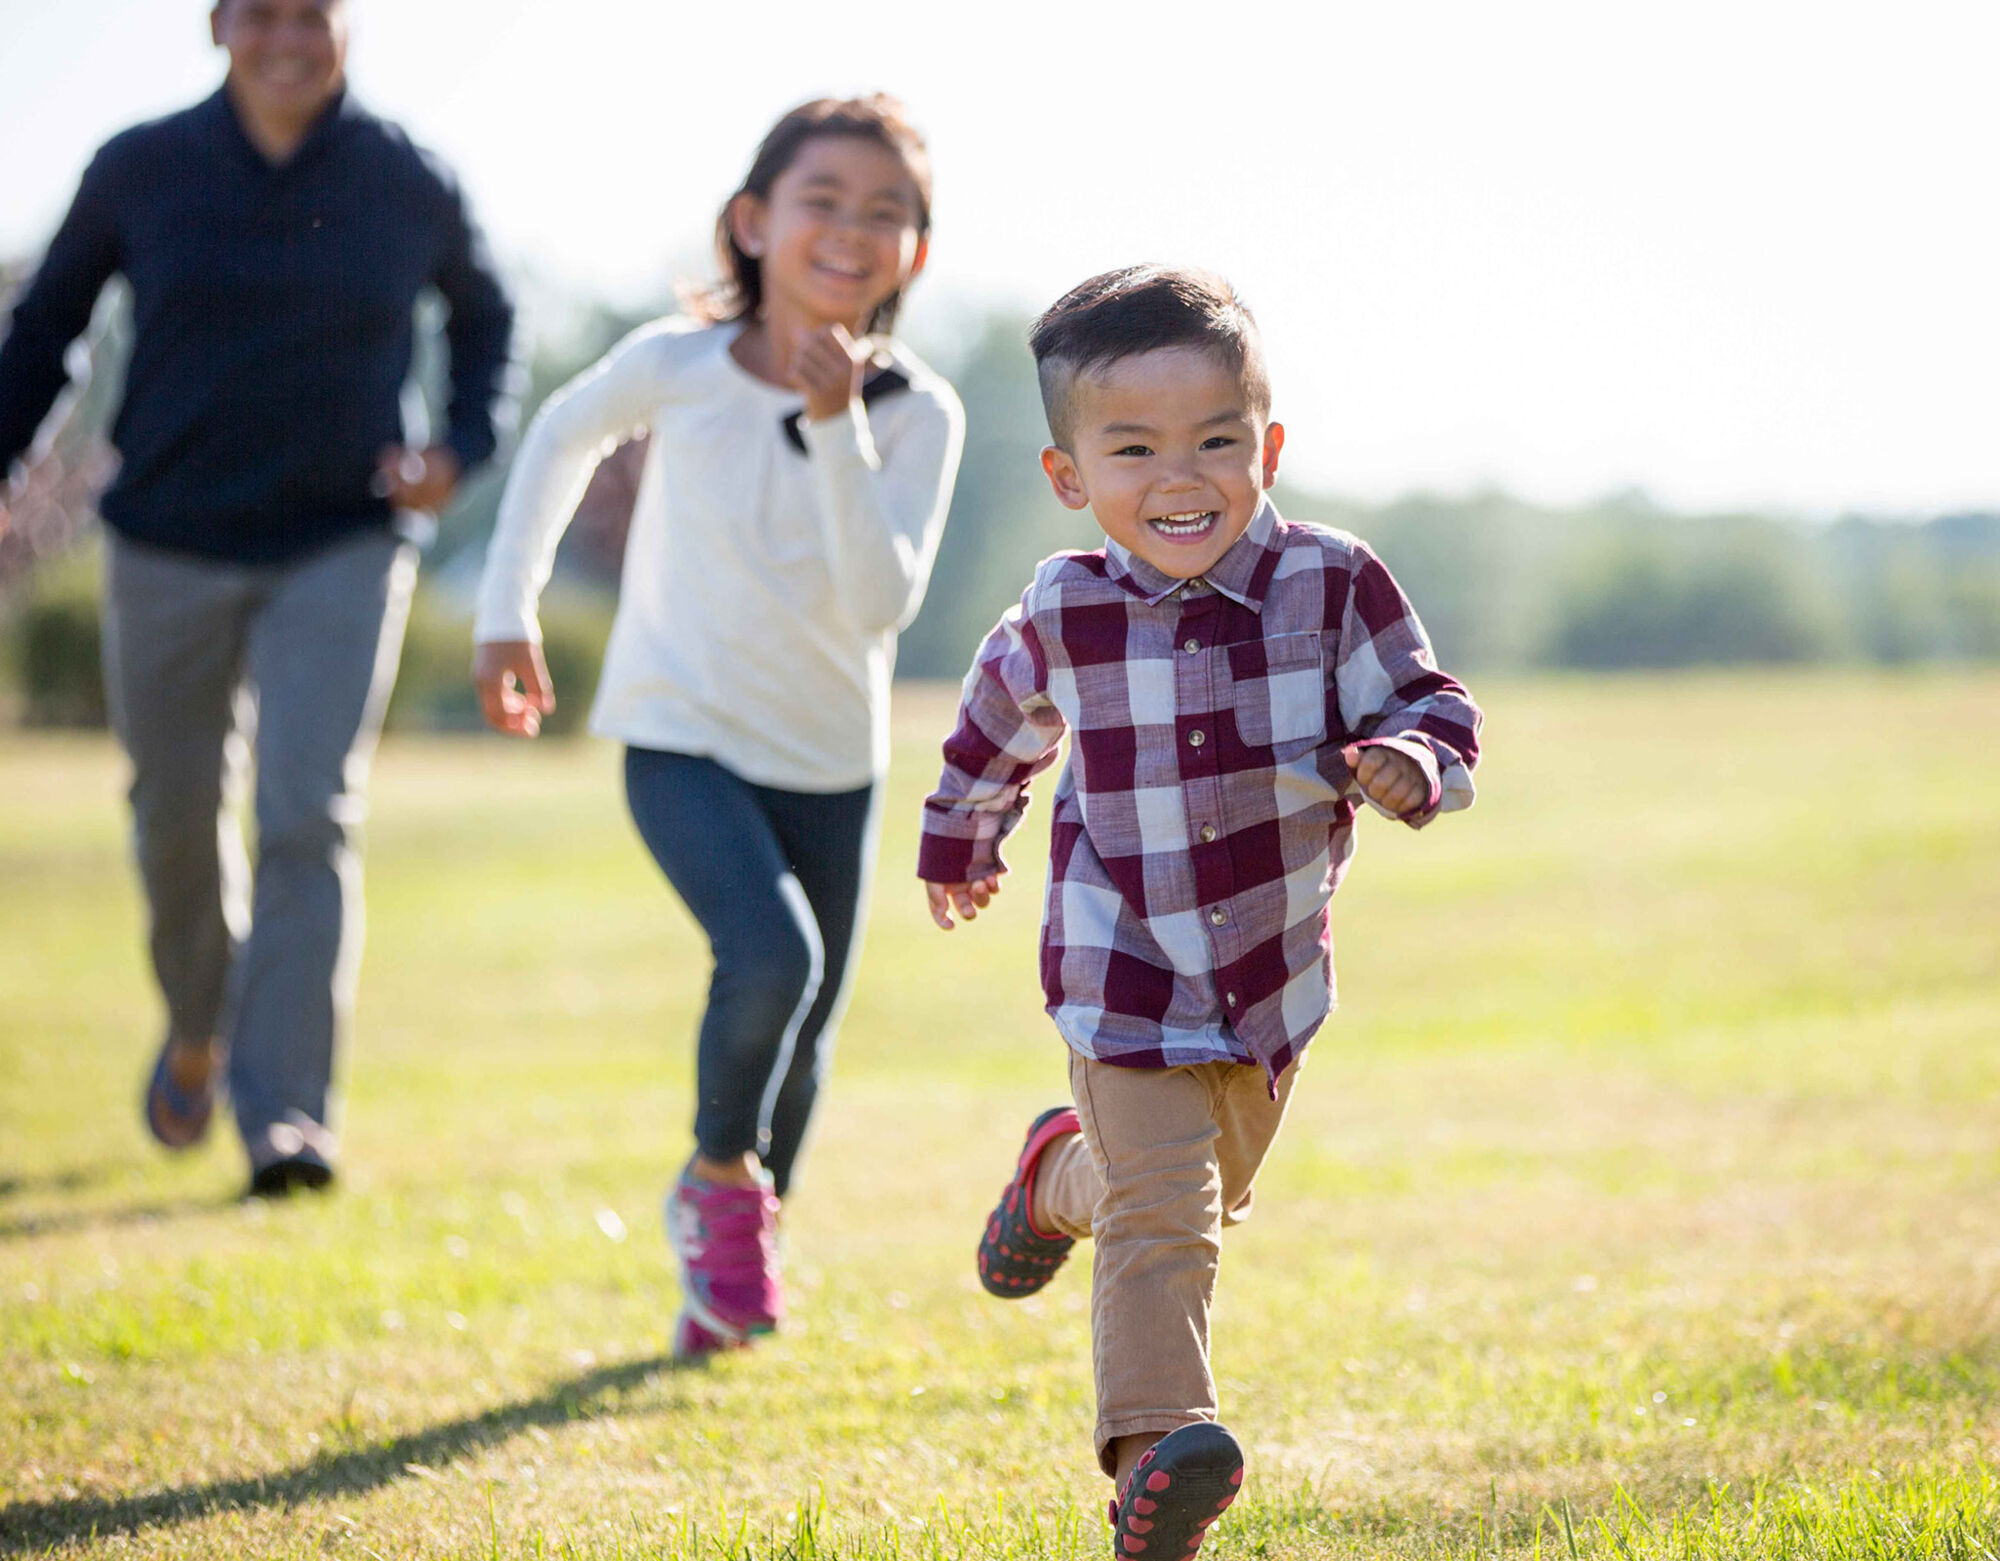 Two children running and smiling on grass with a man running behind them.